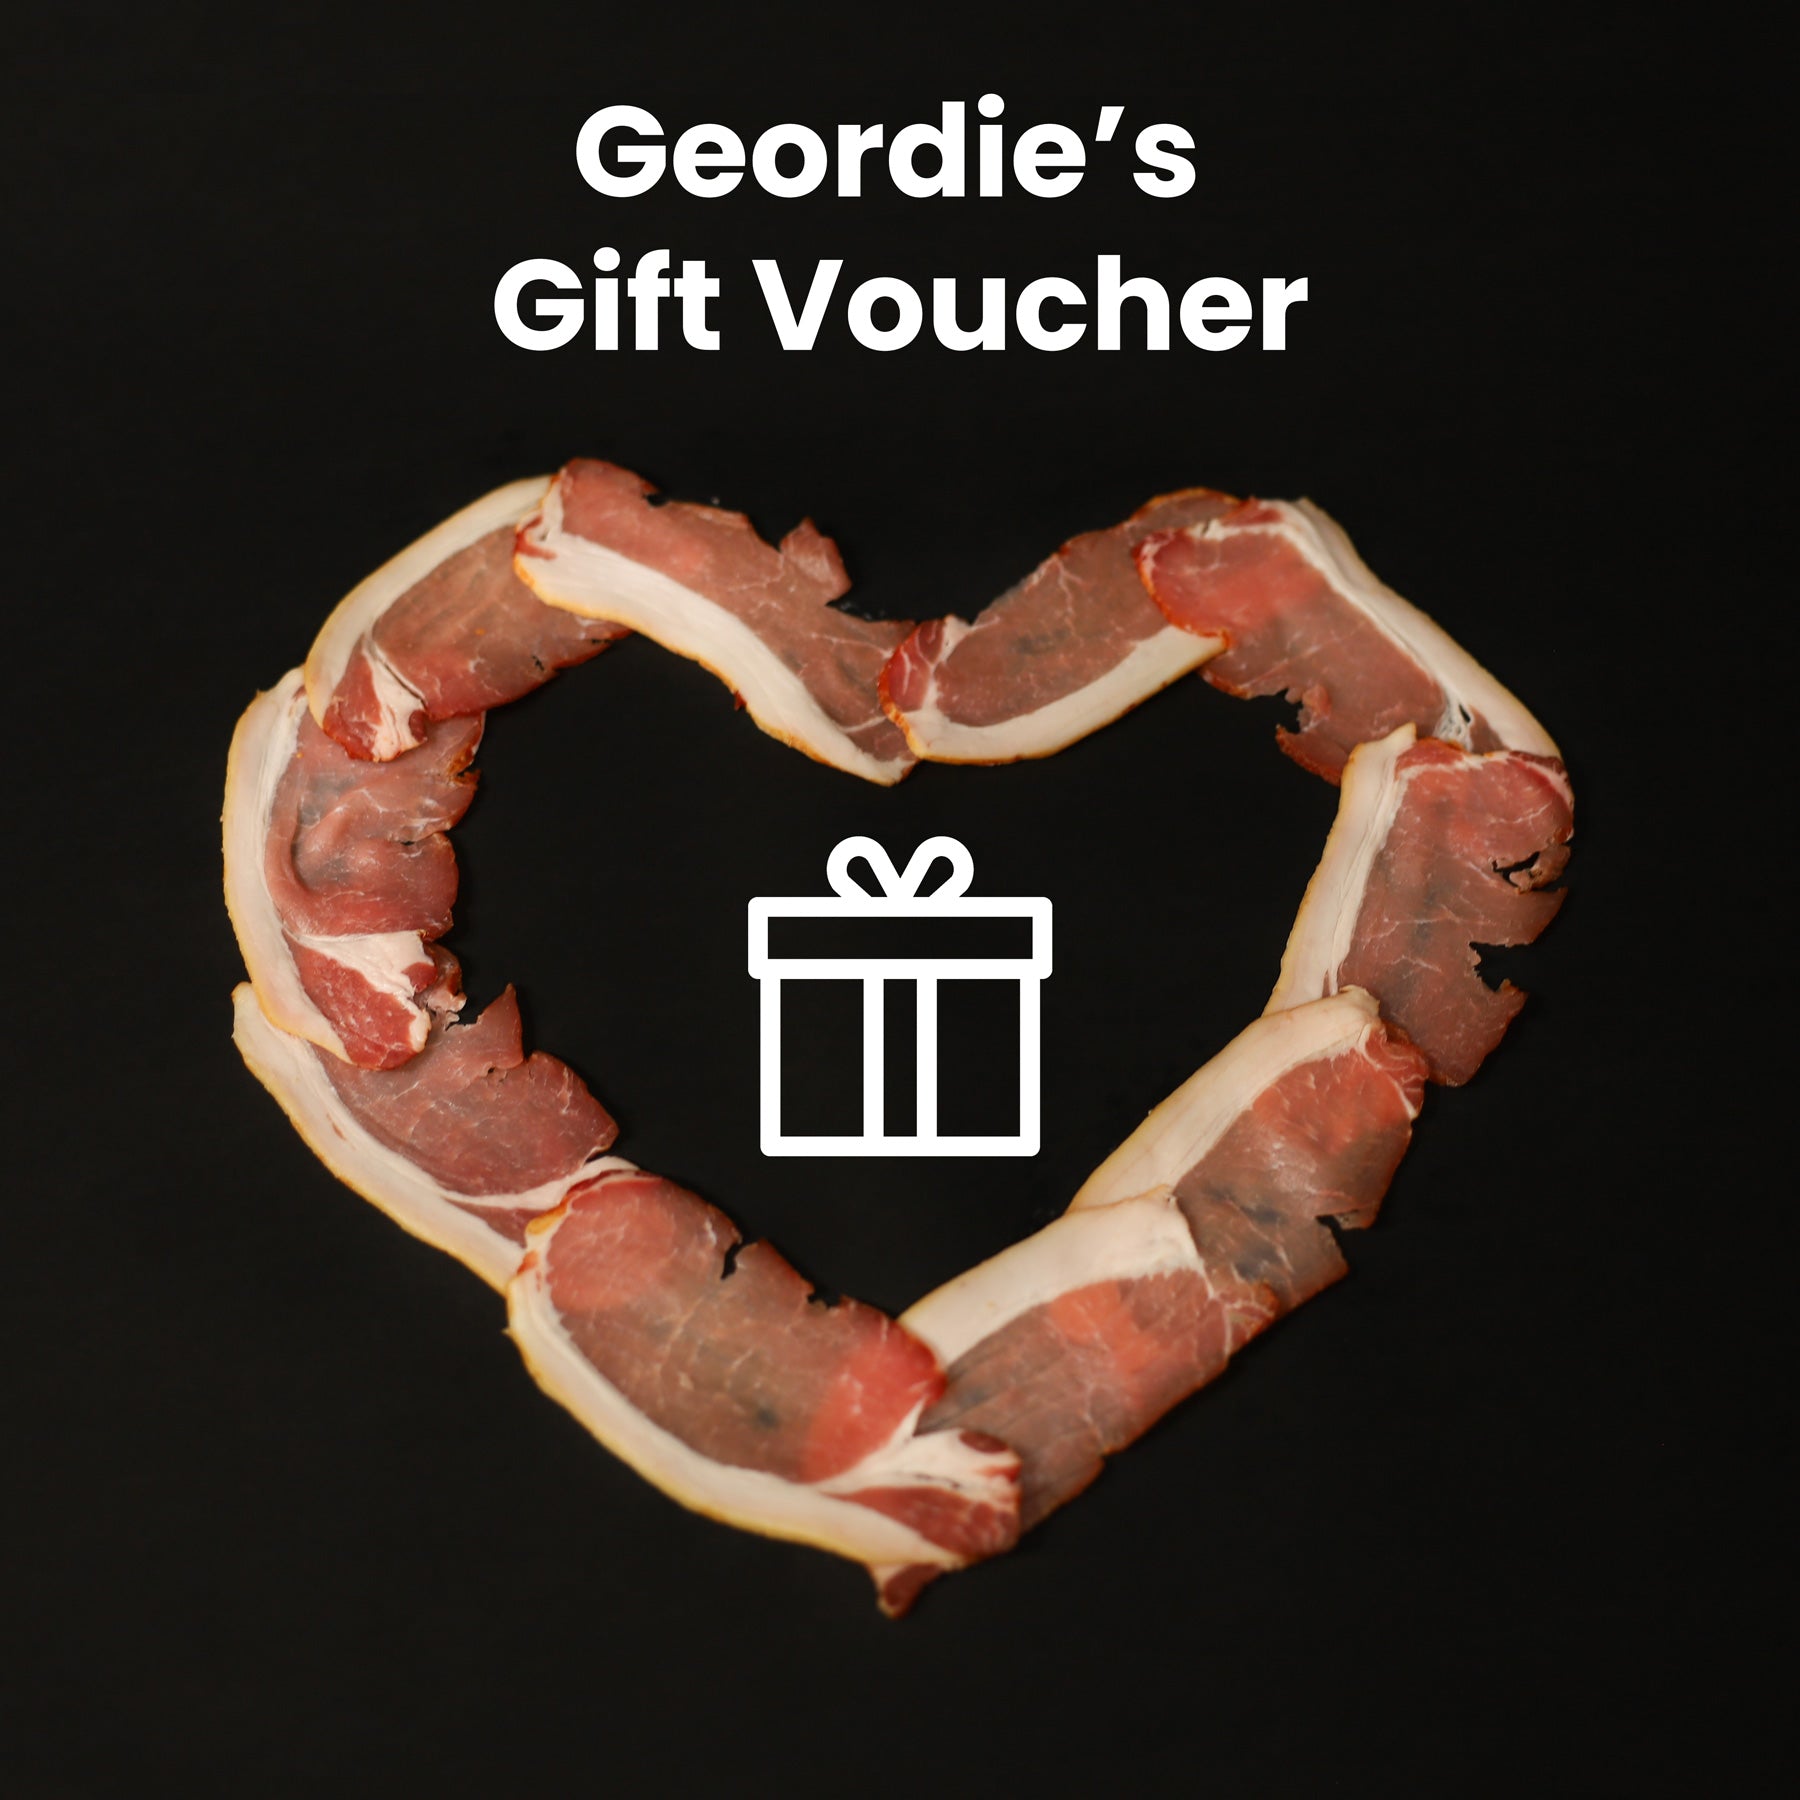 Porky Pounds & Pennies - our Geordie's Gift Voucher